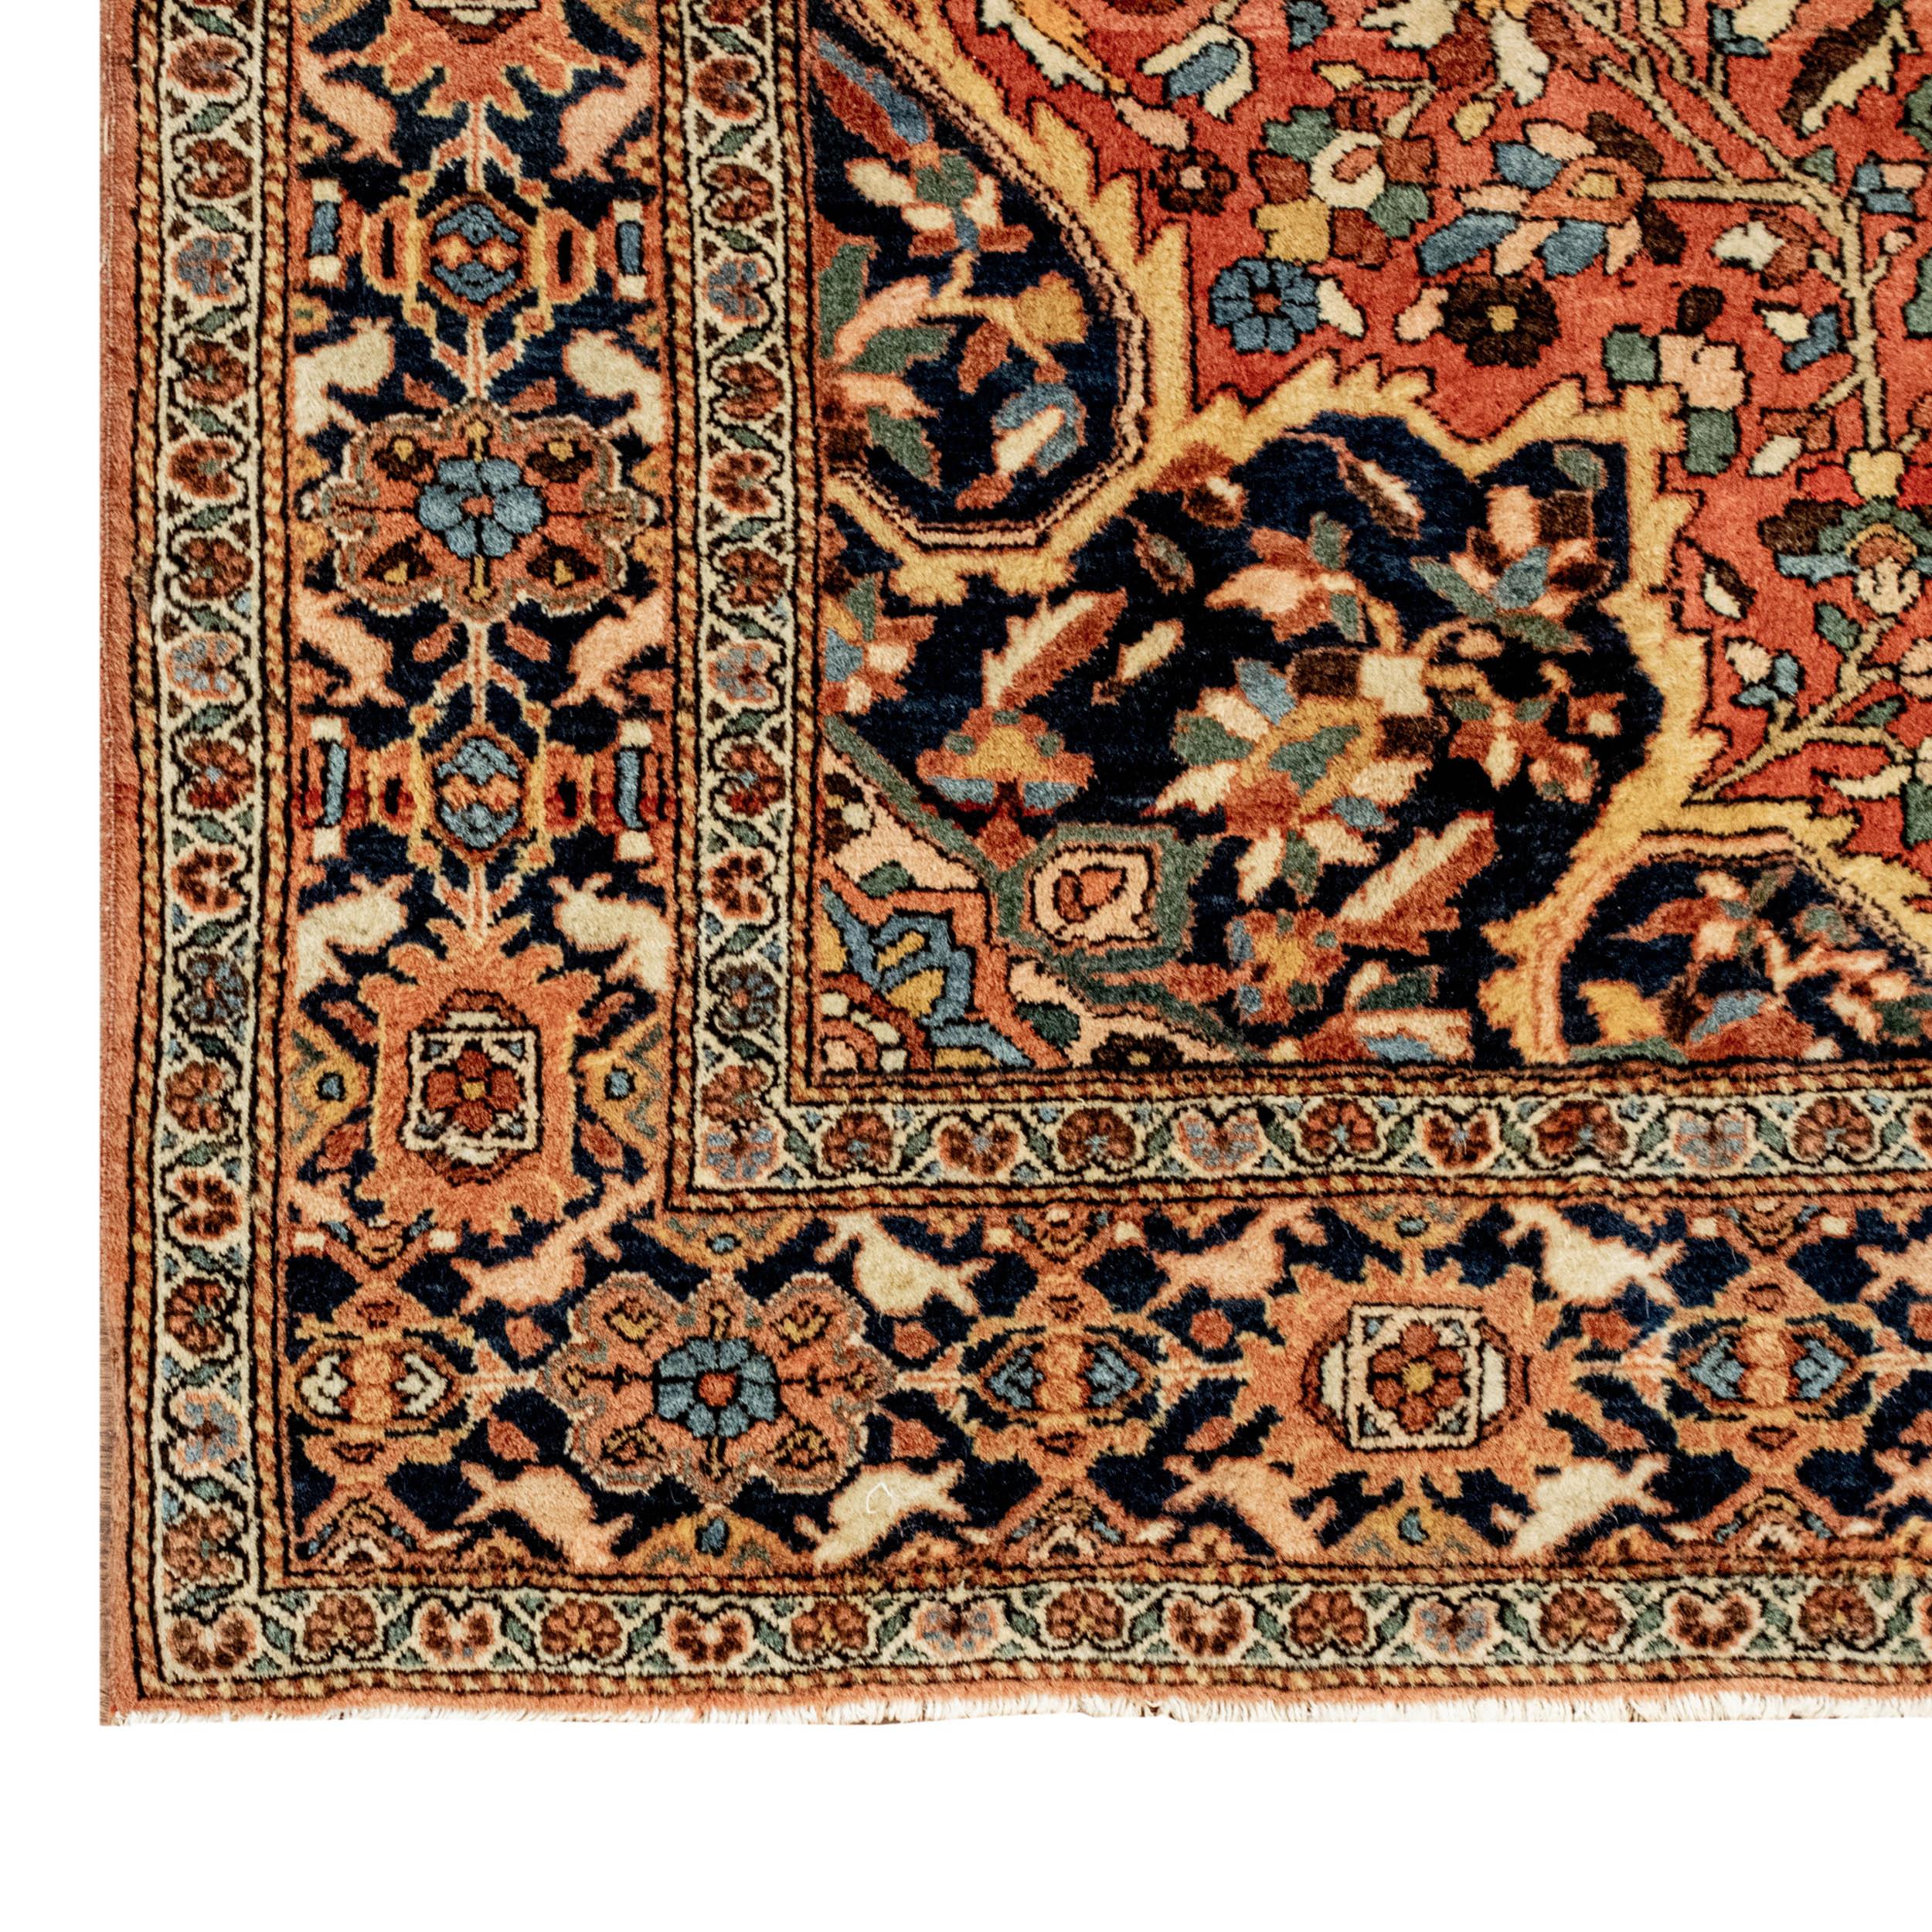 This exquisite antique Persian rug is a testament to fine craftsmanship, featuring traditional handwoven techniques. Crafted from luxurious wool, the rug showcases a captivating blend of rust and navy colors. With dimensions of 4 feet by 6 feet and